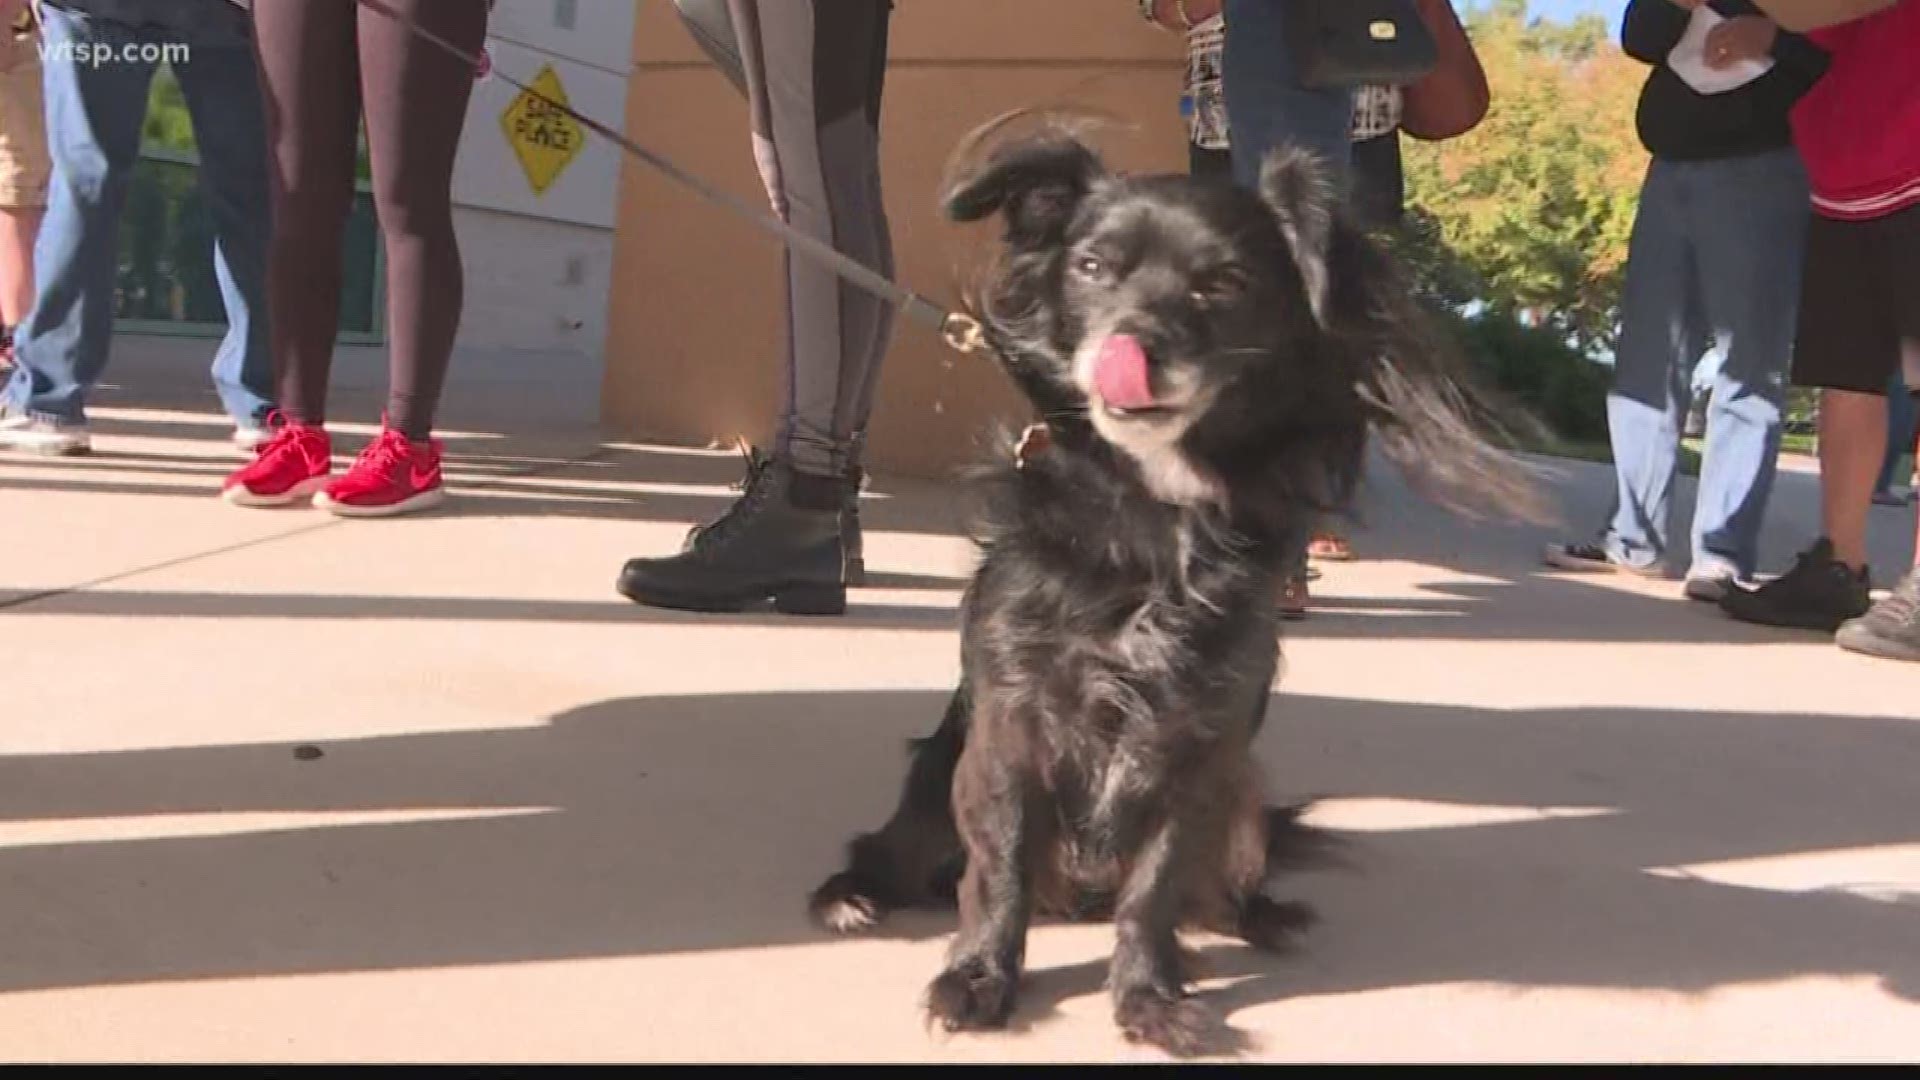 Hillsborough County has set up a two-day adoption event to help streamline the process.